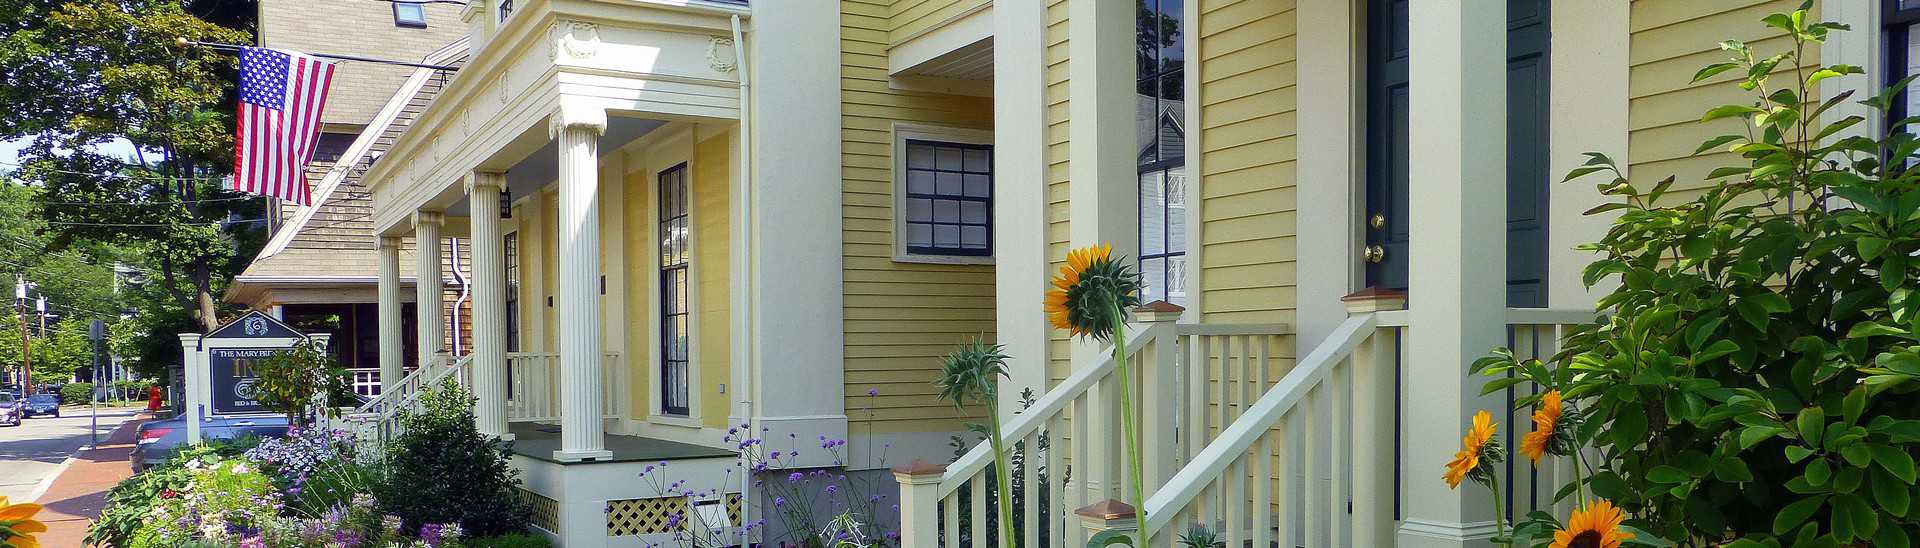 Exterior of yellow house along street with white pillars